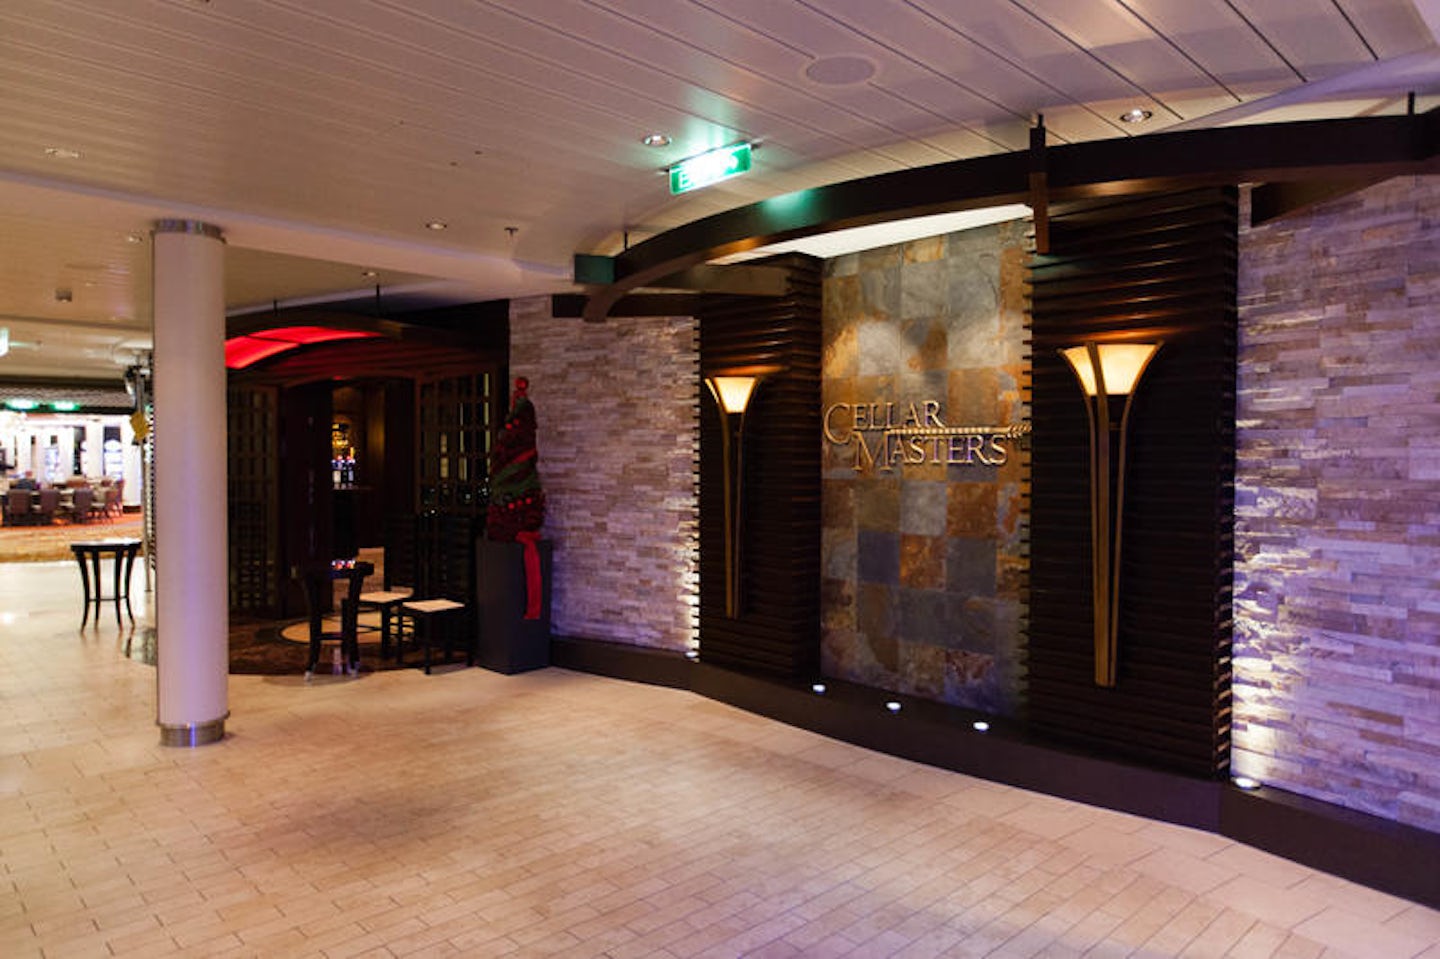 Cellars Masters on Celebrity Silhouette